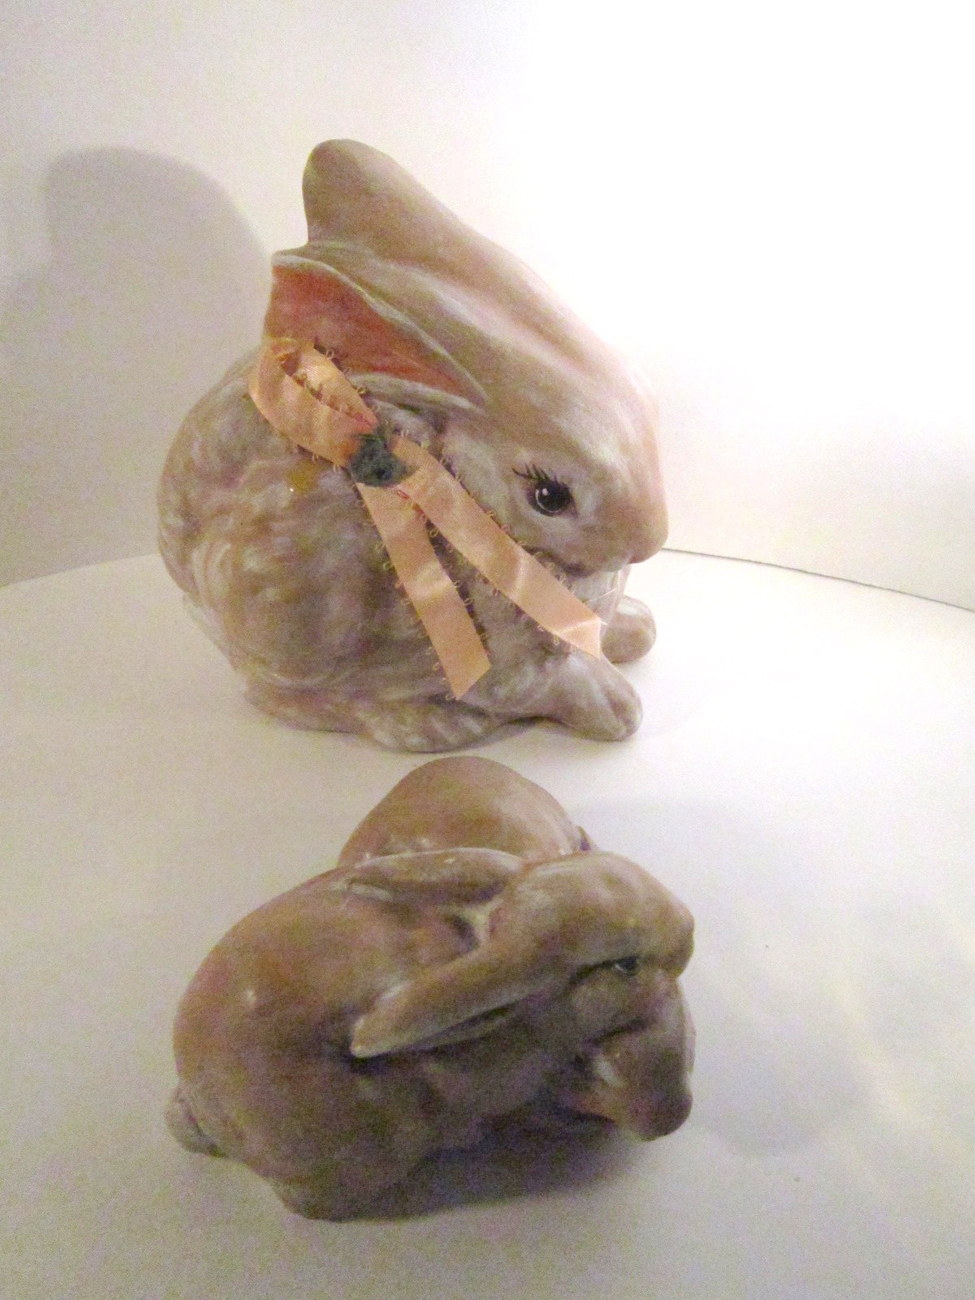 Two Bunny Rabbit Hand Painted Vintage Ceramic Brown Mother And Kits Rabbits